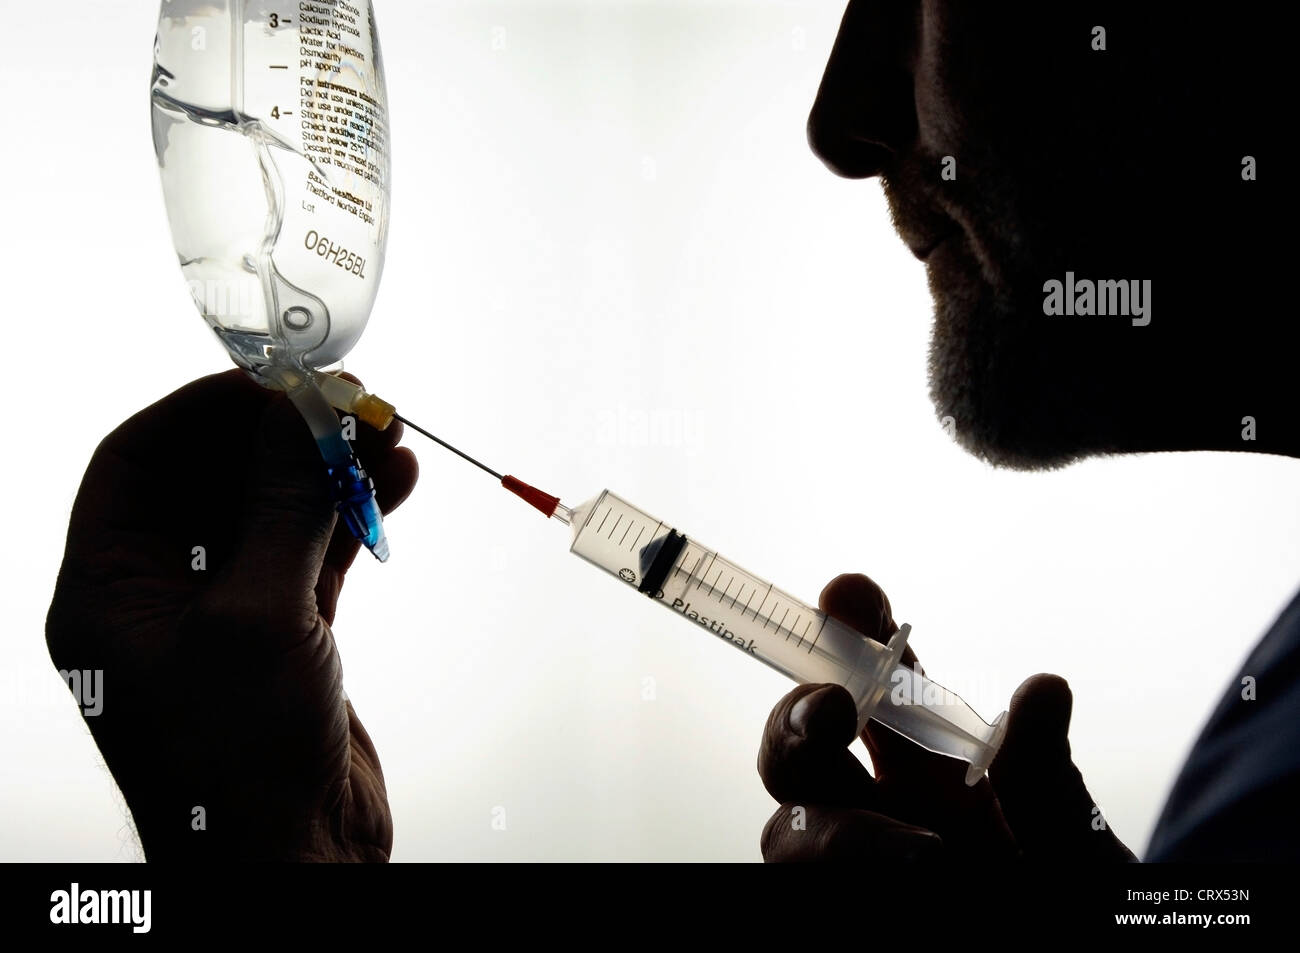 In a shadow, a doctor draws sodium lactate solution into a syringe. Stock Photo